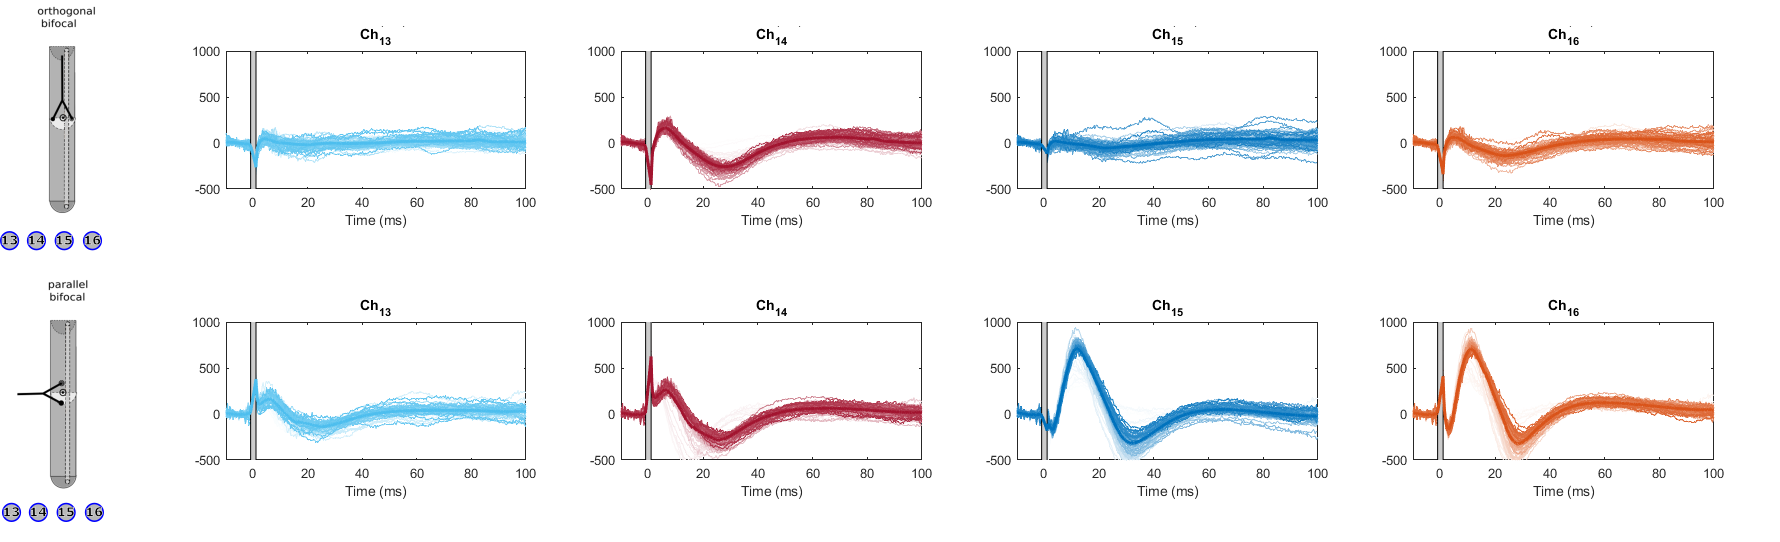 Recorded evoked potentials for contacts 13, 14, 15 and 16 with a 2.5mA intensity, 9Hz frequency, and biphasic stimulation pulse. A) Orthogonal configuration. B) Parallel configuration